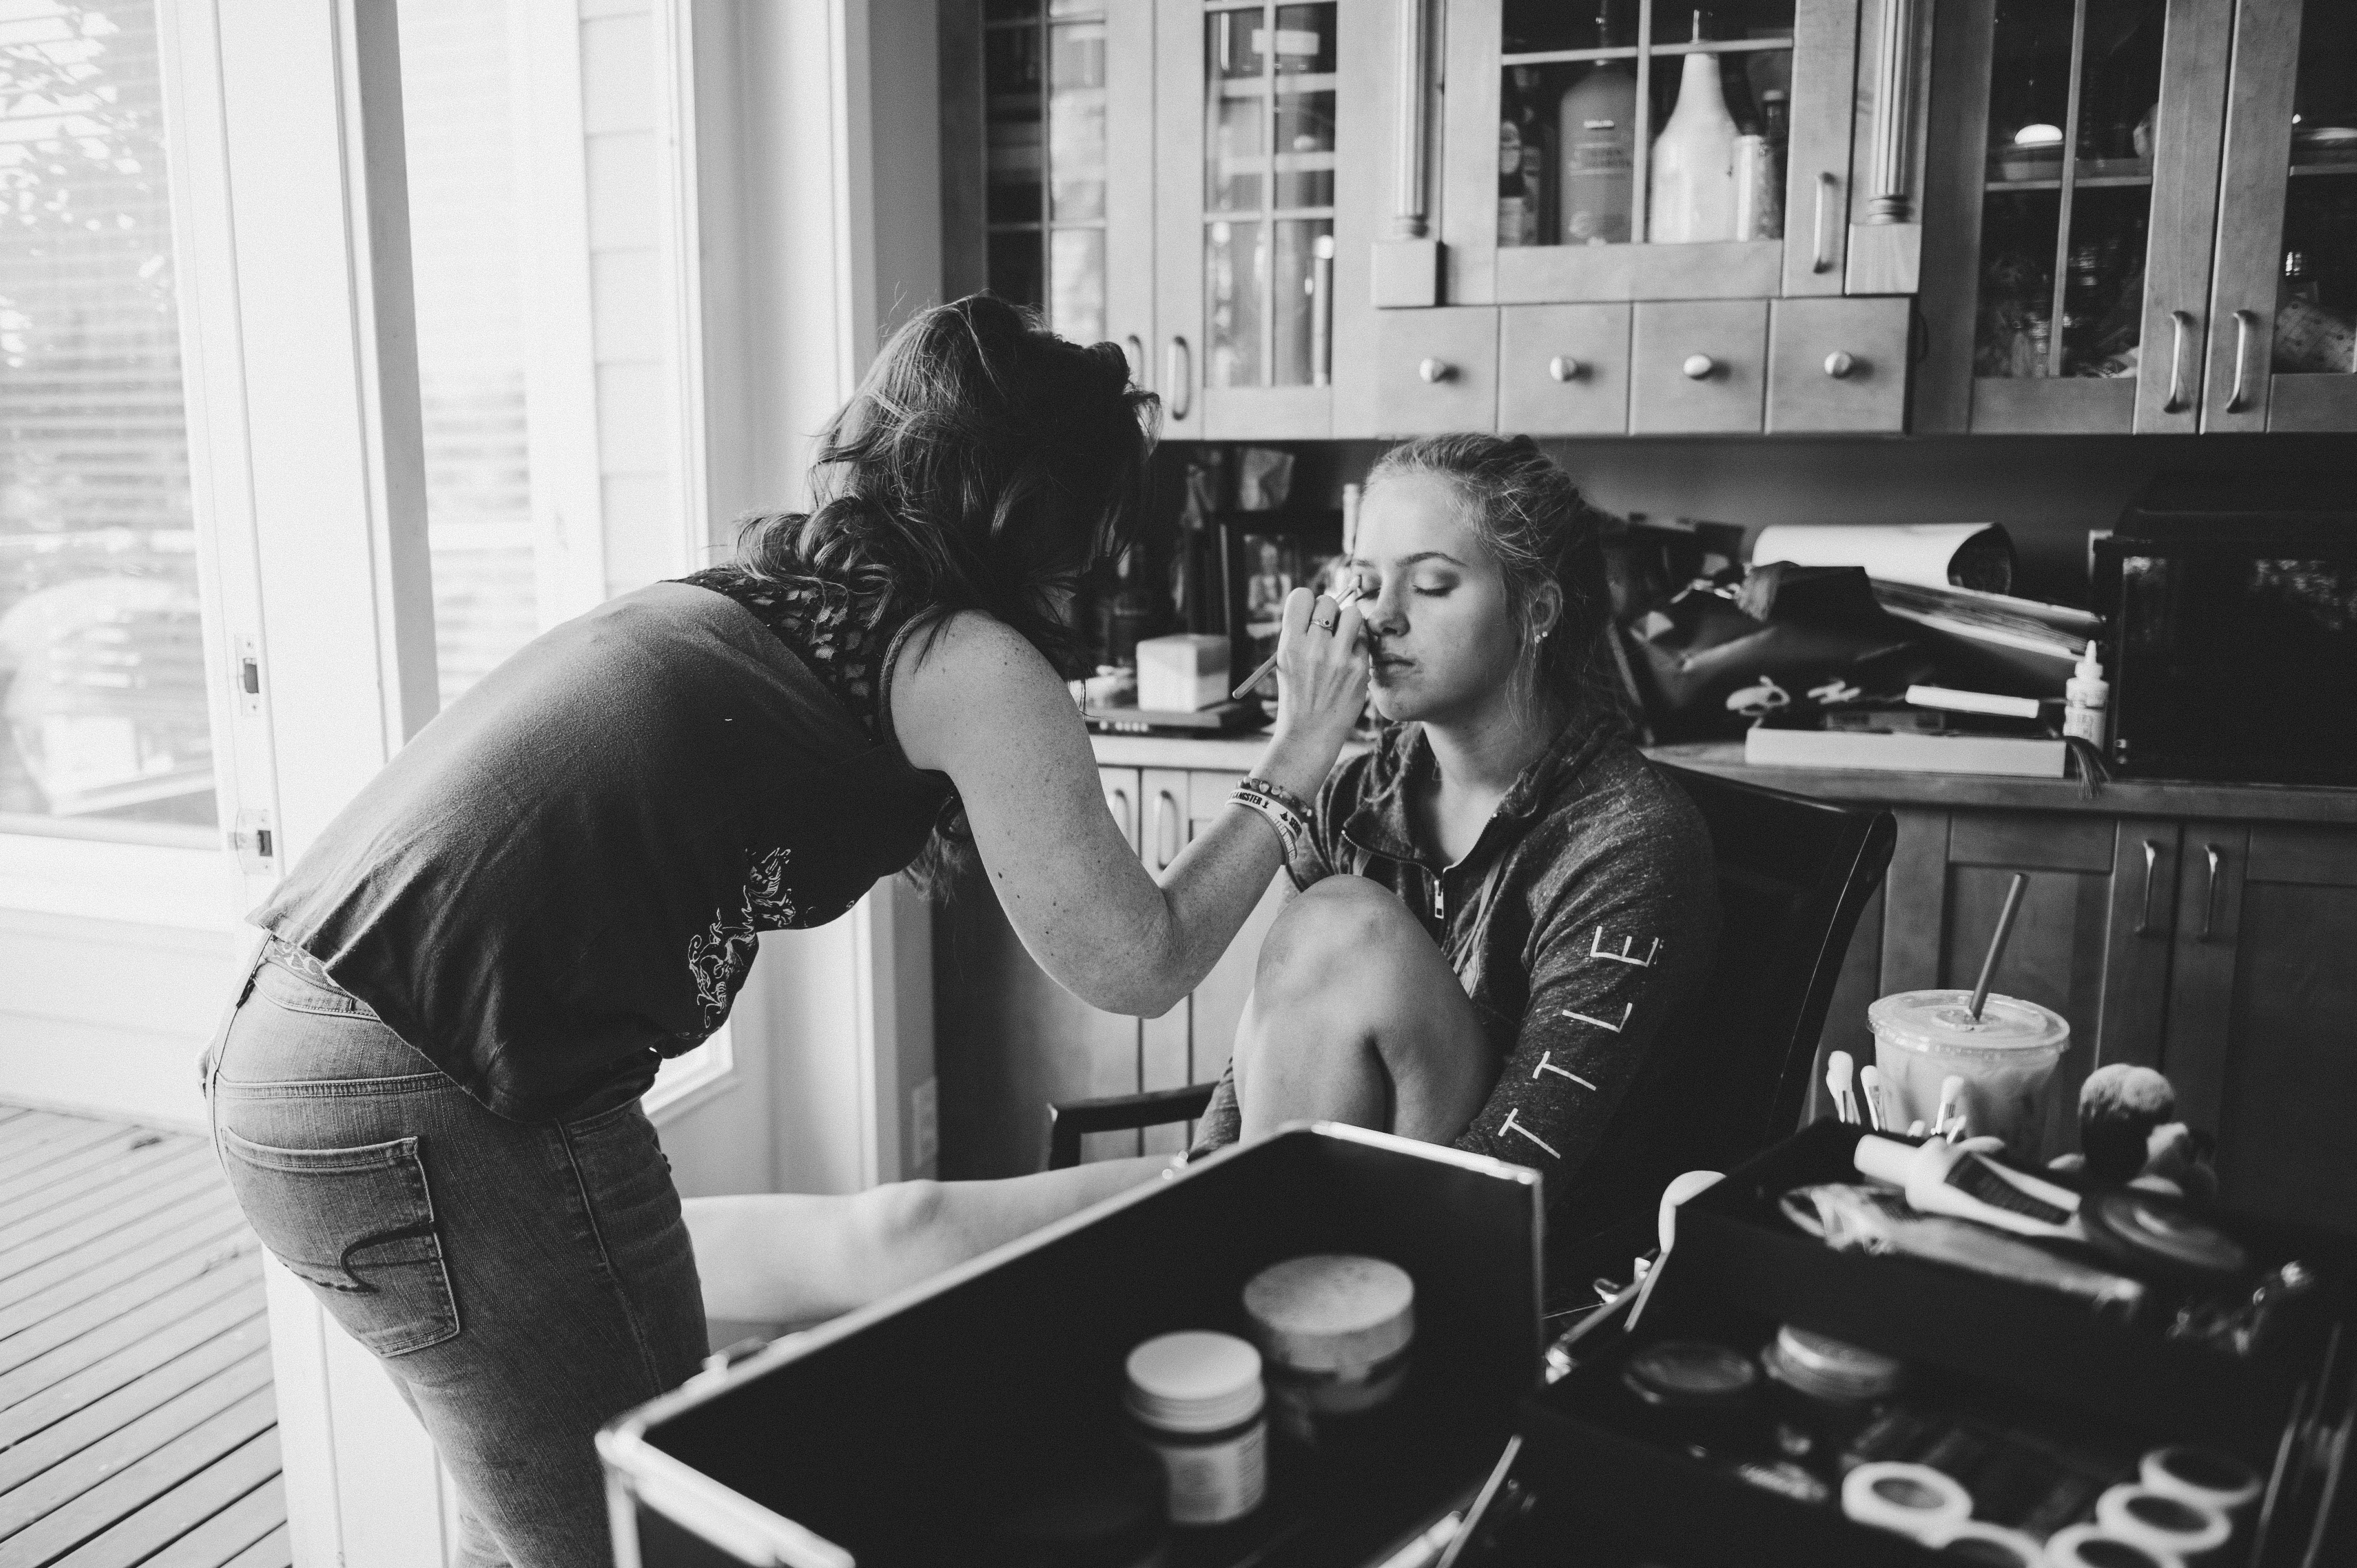 Black & White Portrait of Senior Girl Getting Ready for Senior Portraits with a Professional Makeup Artist Provided by Tacoma Senior Photographer Amanda Howse